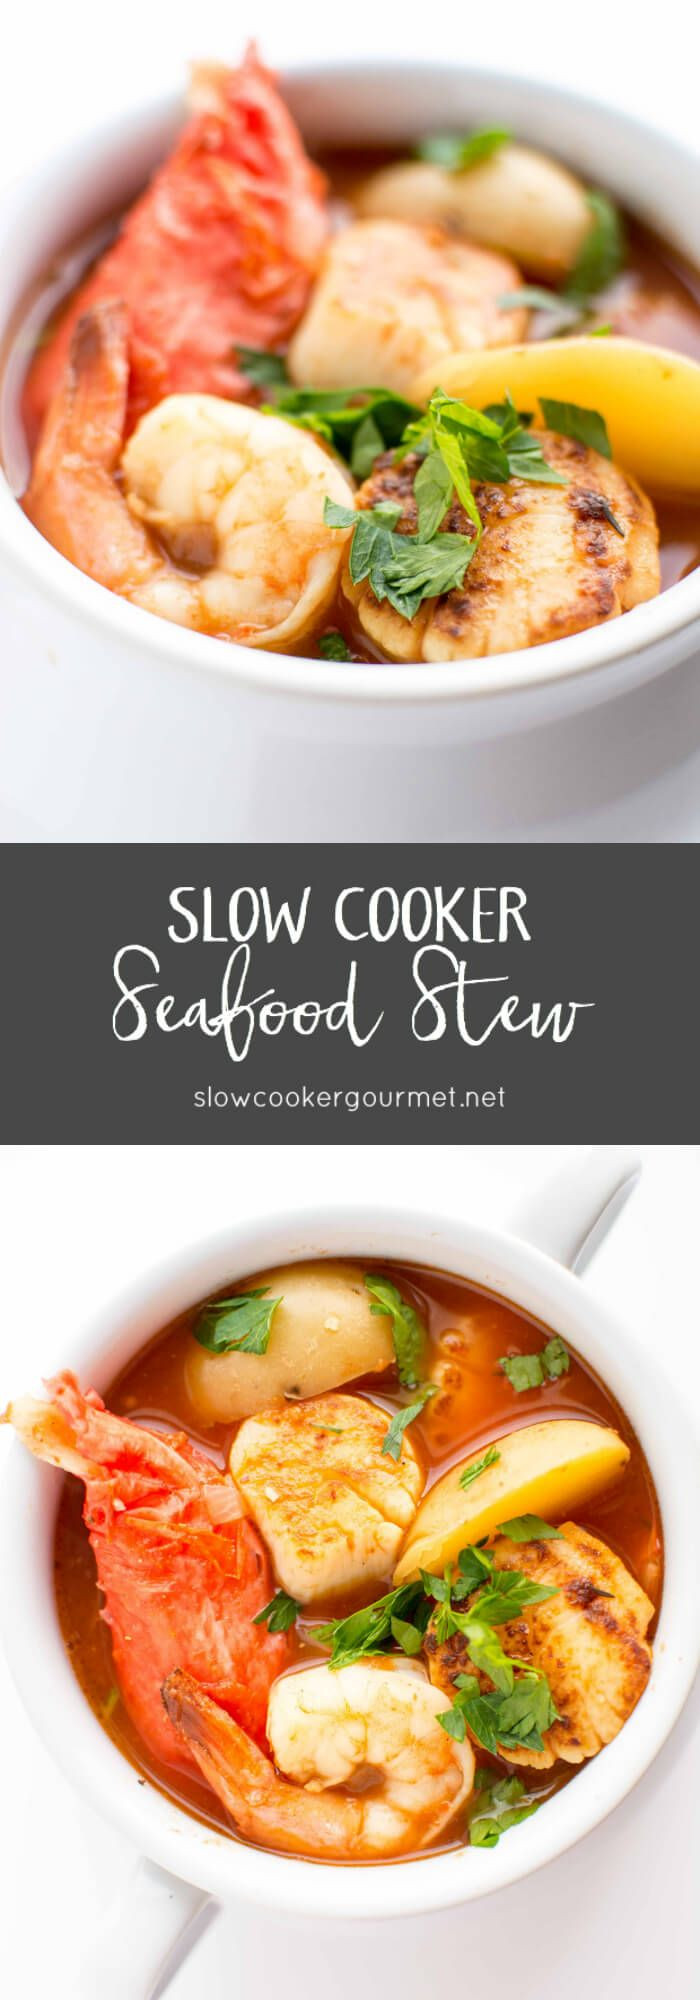 Crockpot Fish Recipes
 Slow Cooker Seafood Stew